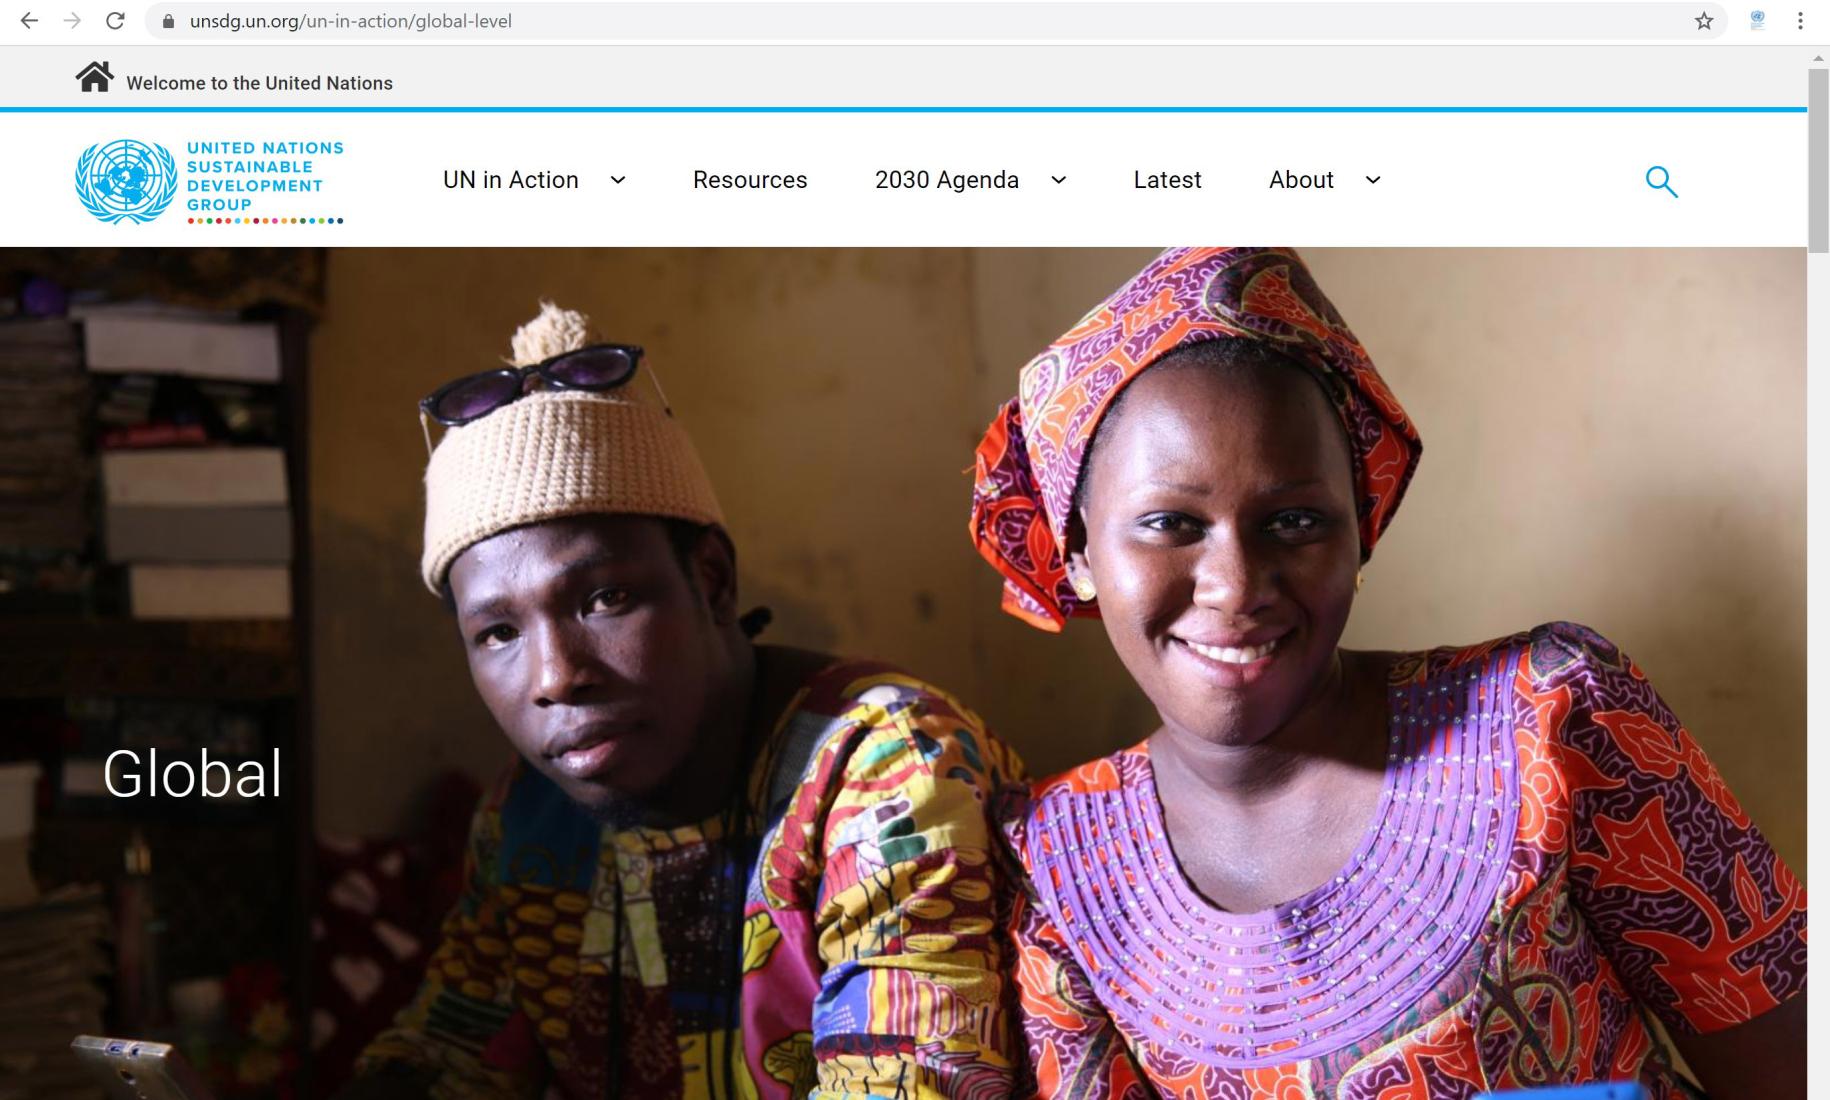 Screenshot of the UN in Action page on the UNSDG global website